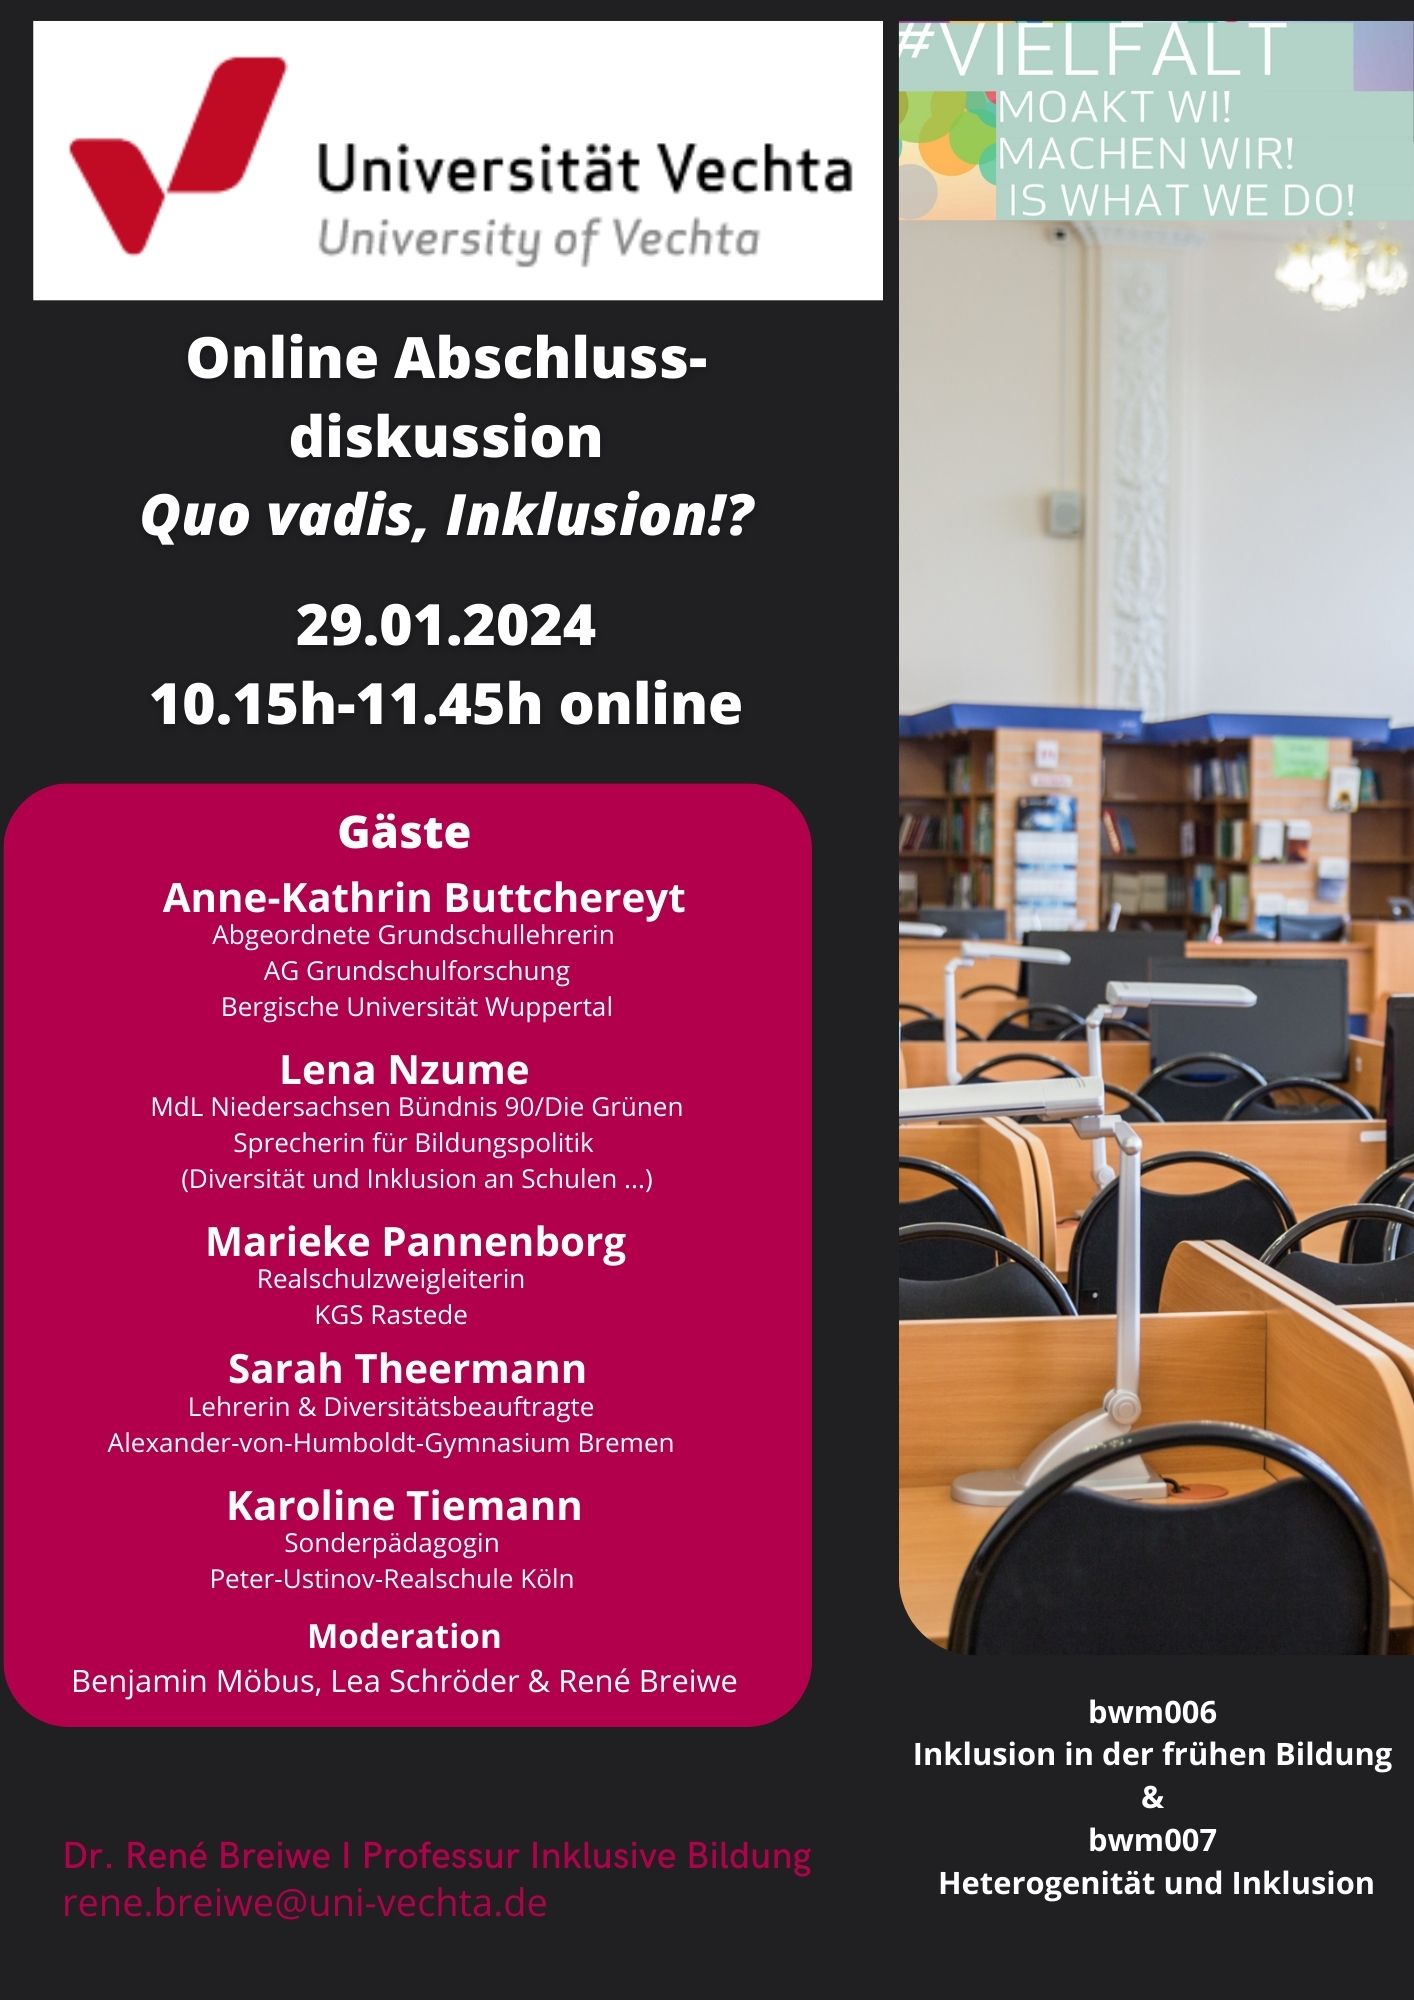 Online Diskussion „Quo vadis, Inklusion!?“ am 29.01.2024